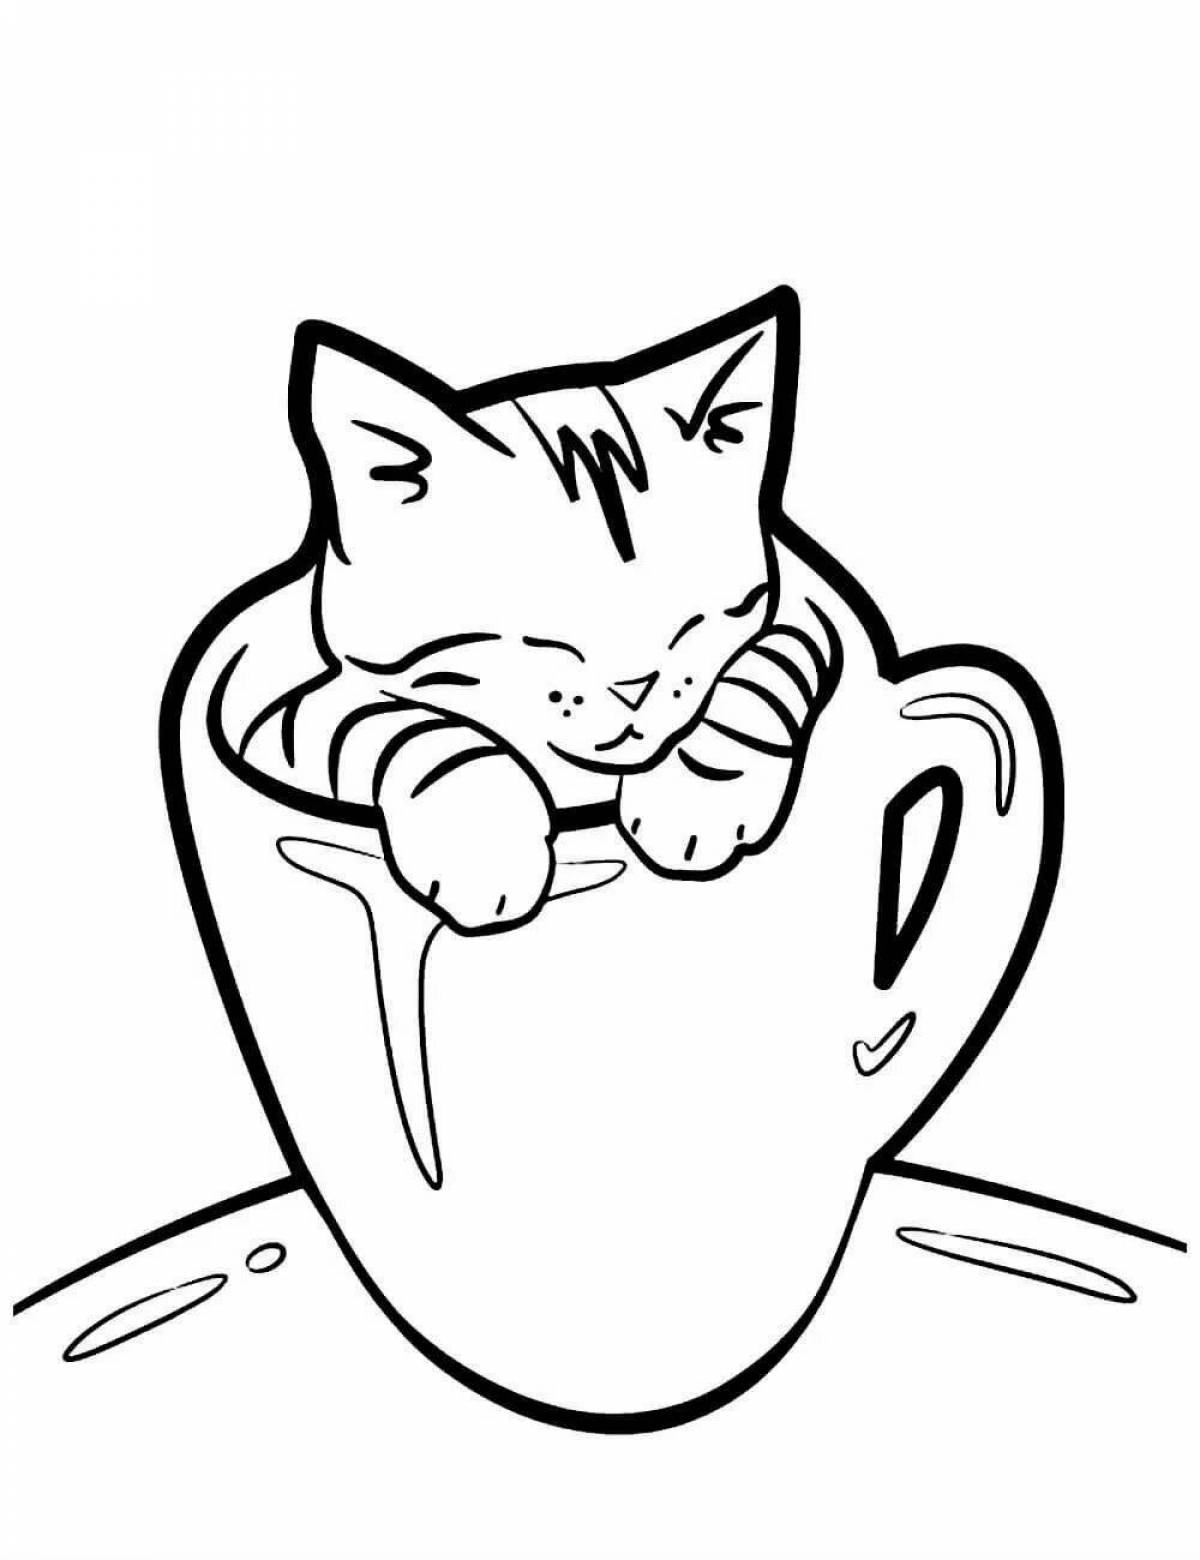 Coloring page cute cat in a cup